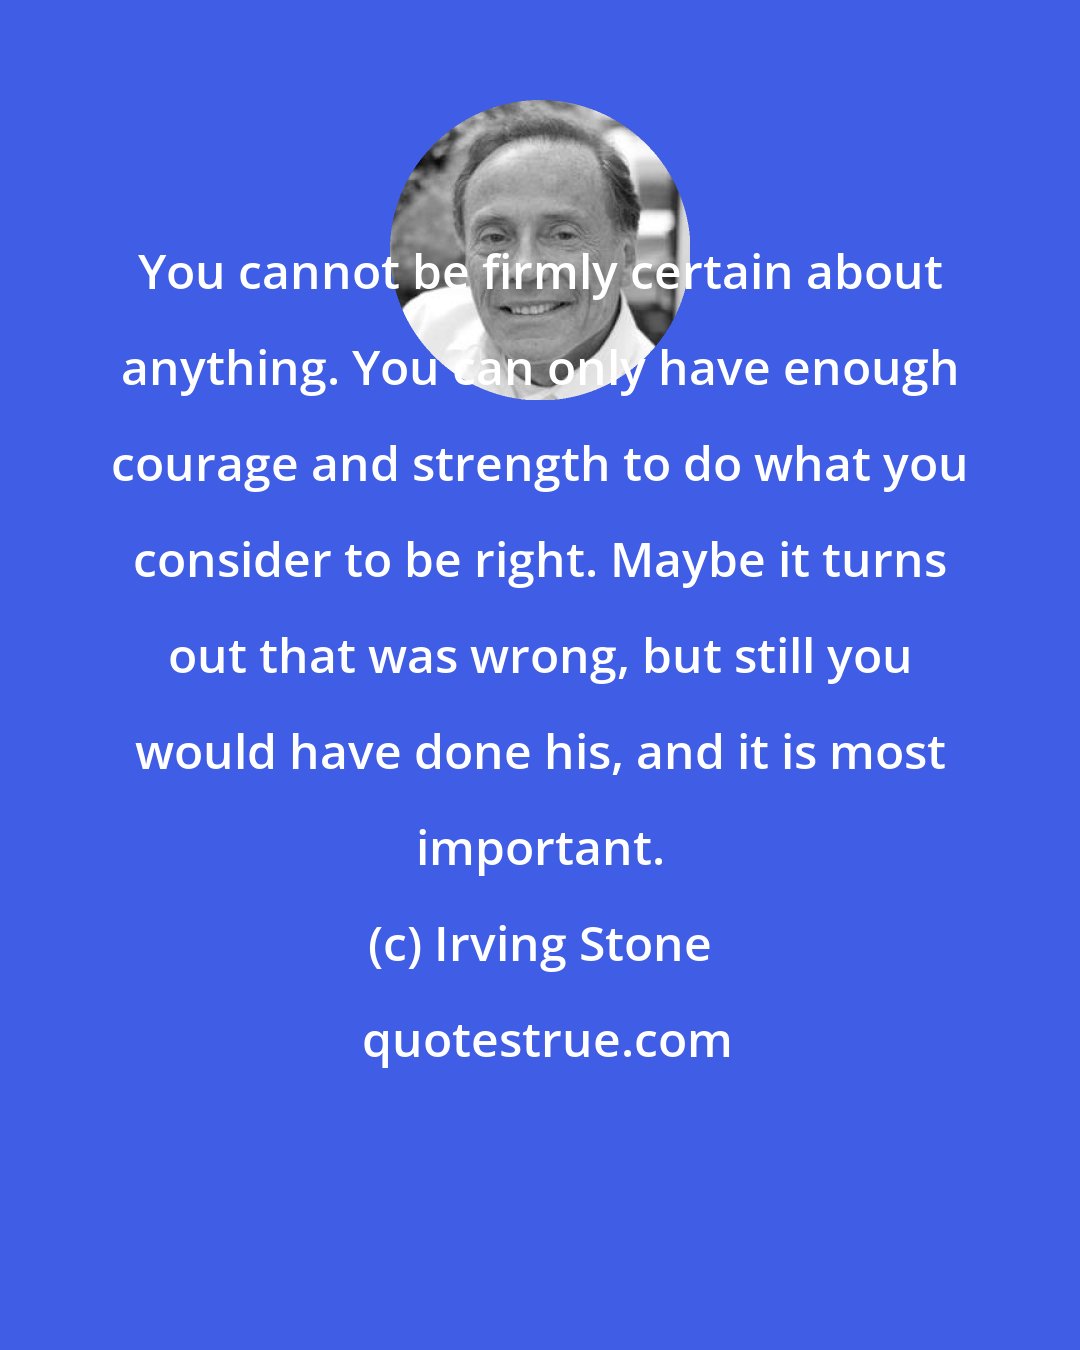 Irving Stone: You cannot be firmly certain about anything. You can only have enough courage and strength to do what you consider to be right. Maybe it turns out that was wrong, but still you would have done his, and it is most important.